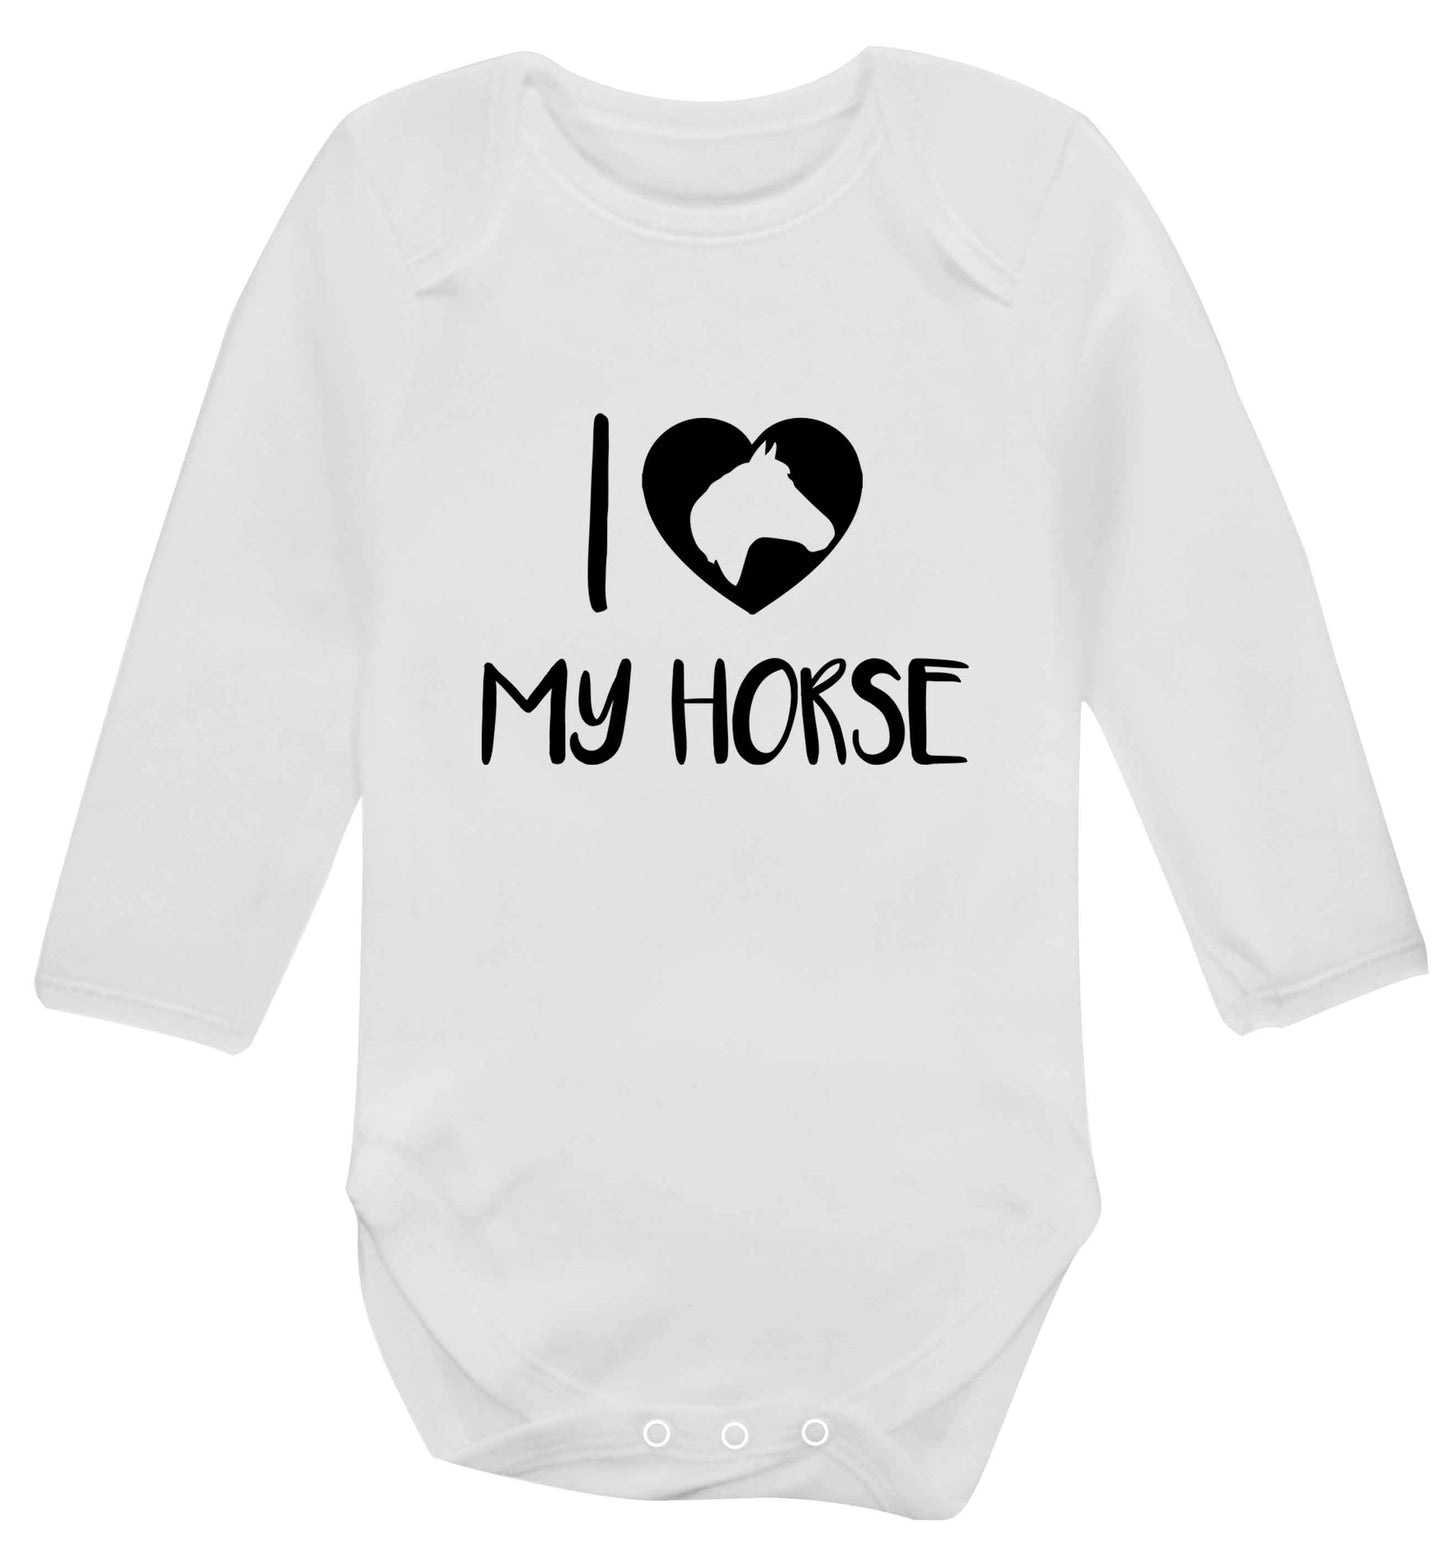 I love my horse baby vest long sleeved white 6-12 months